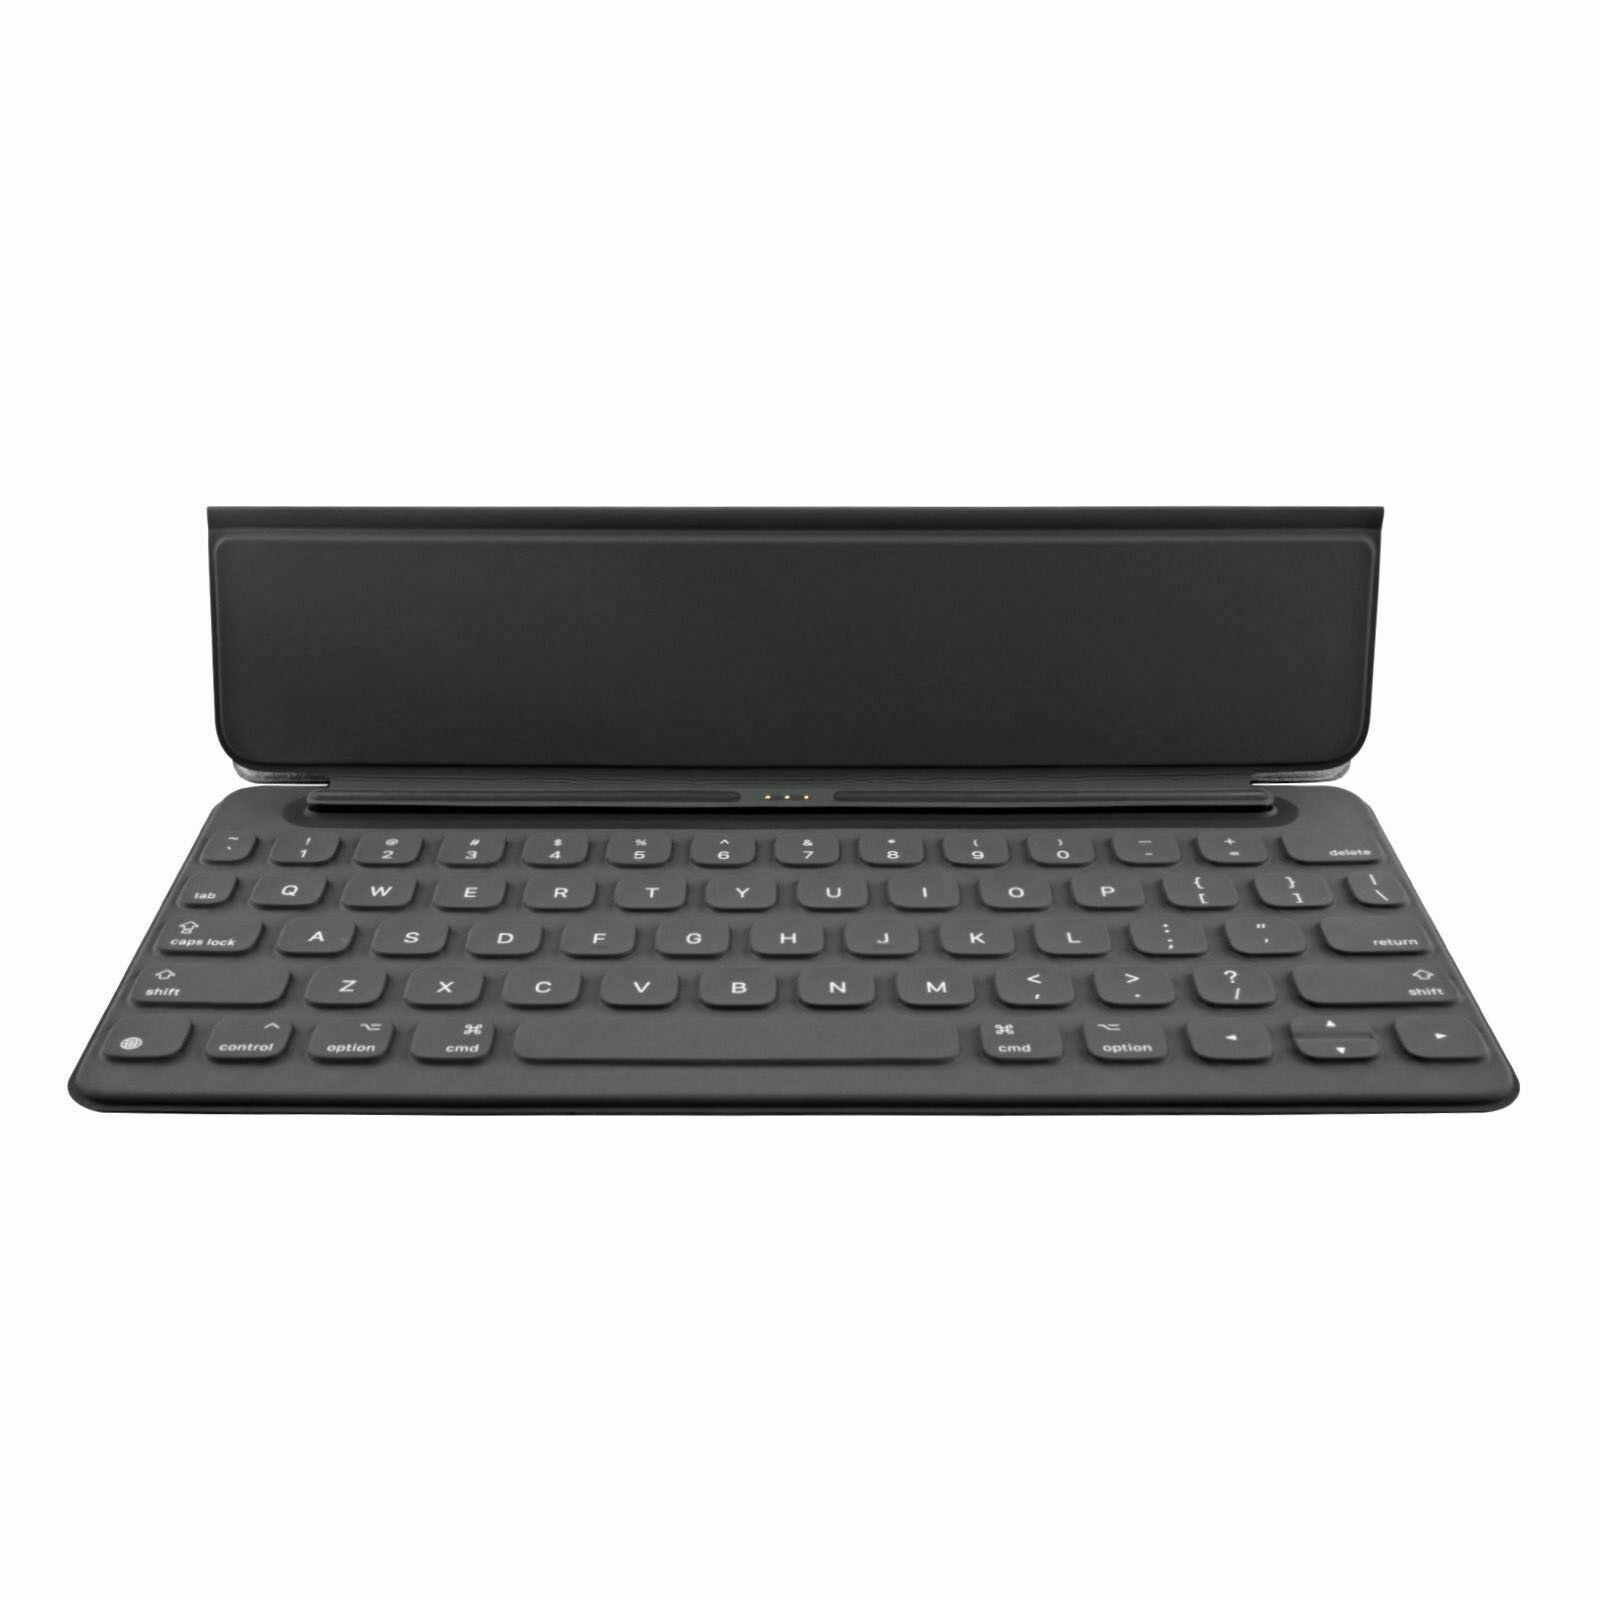 Apple Smart Keyboard For iPad Pro 10.5 in/inch Authentic MPTL2LL/A A1829